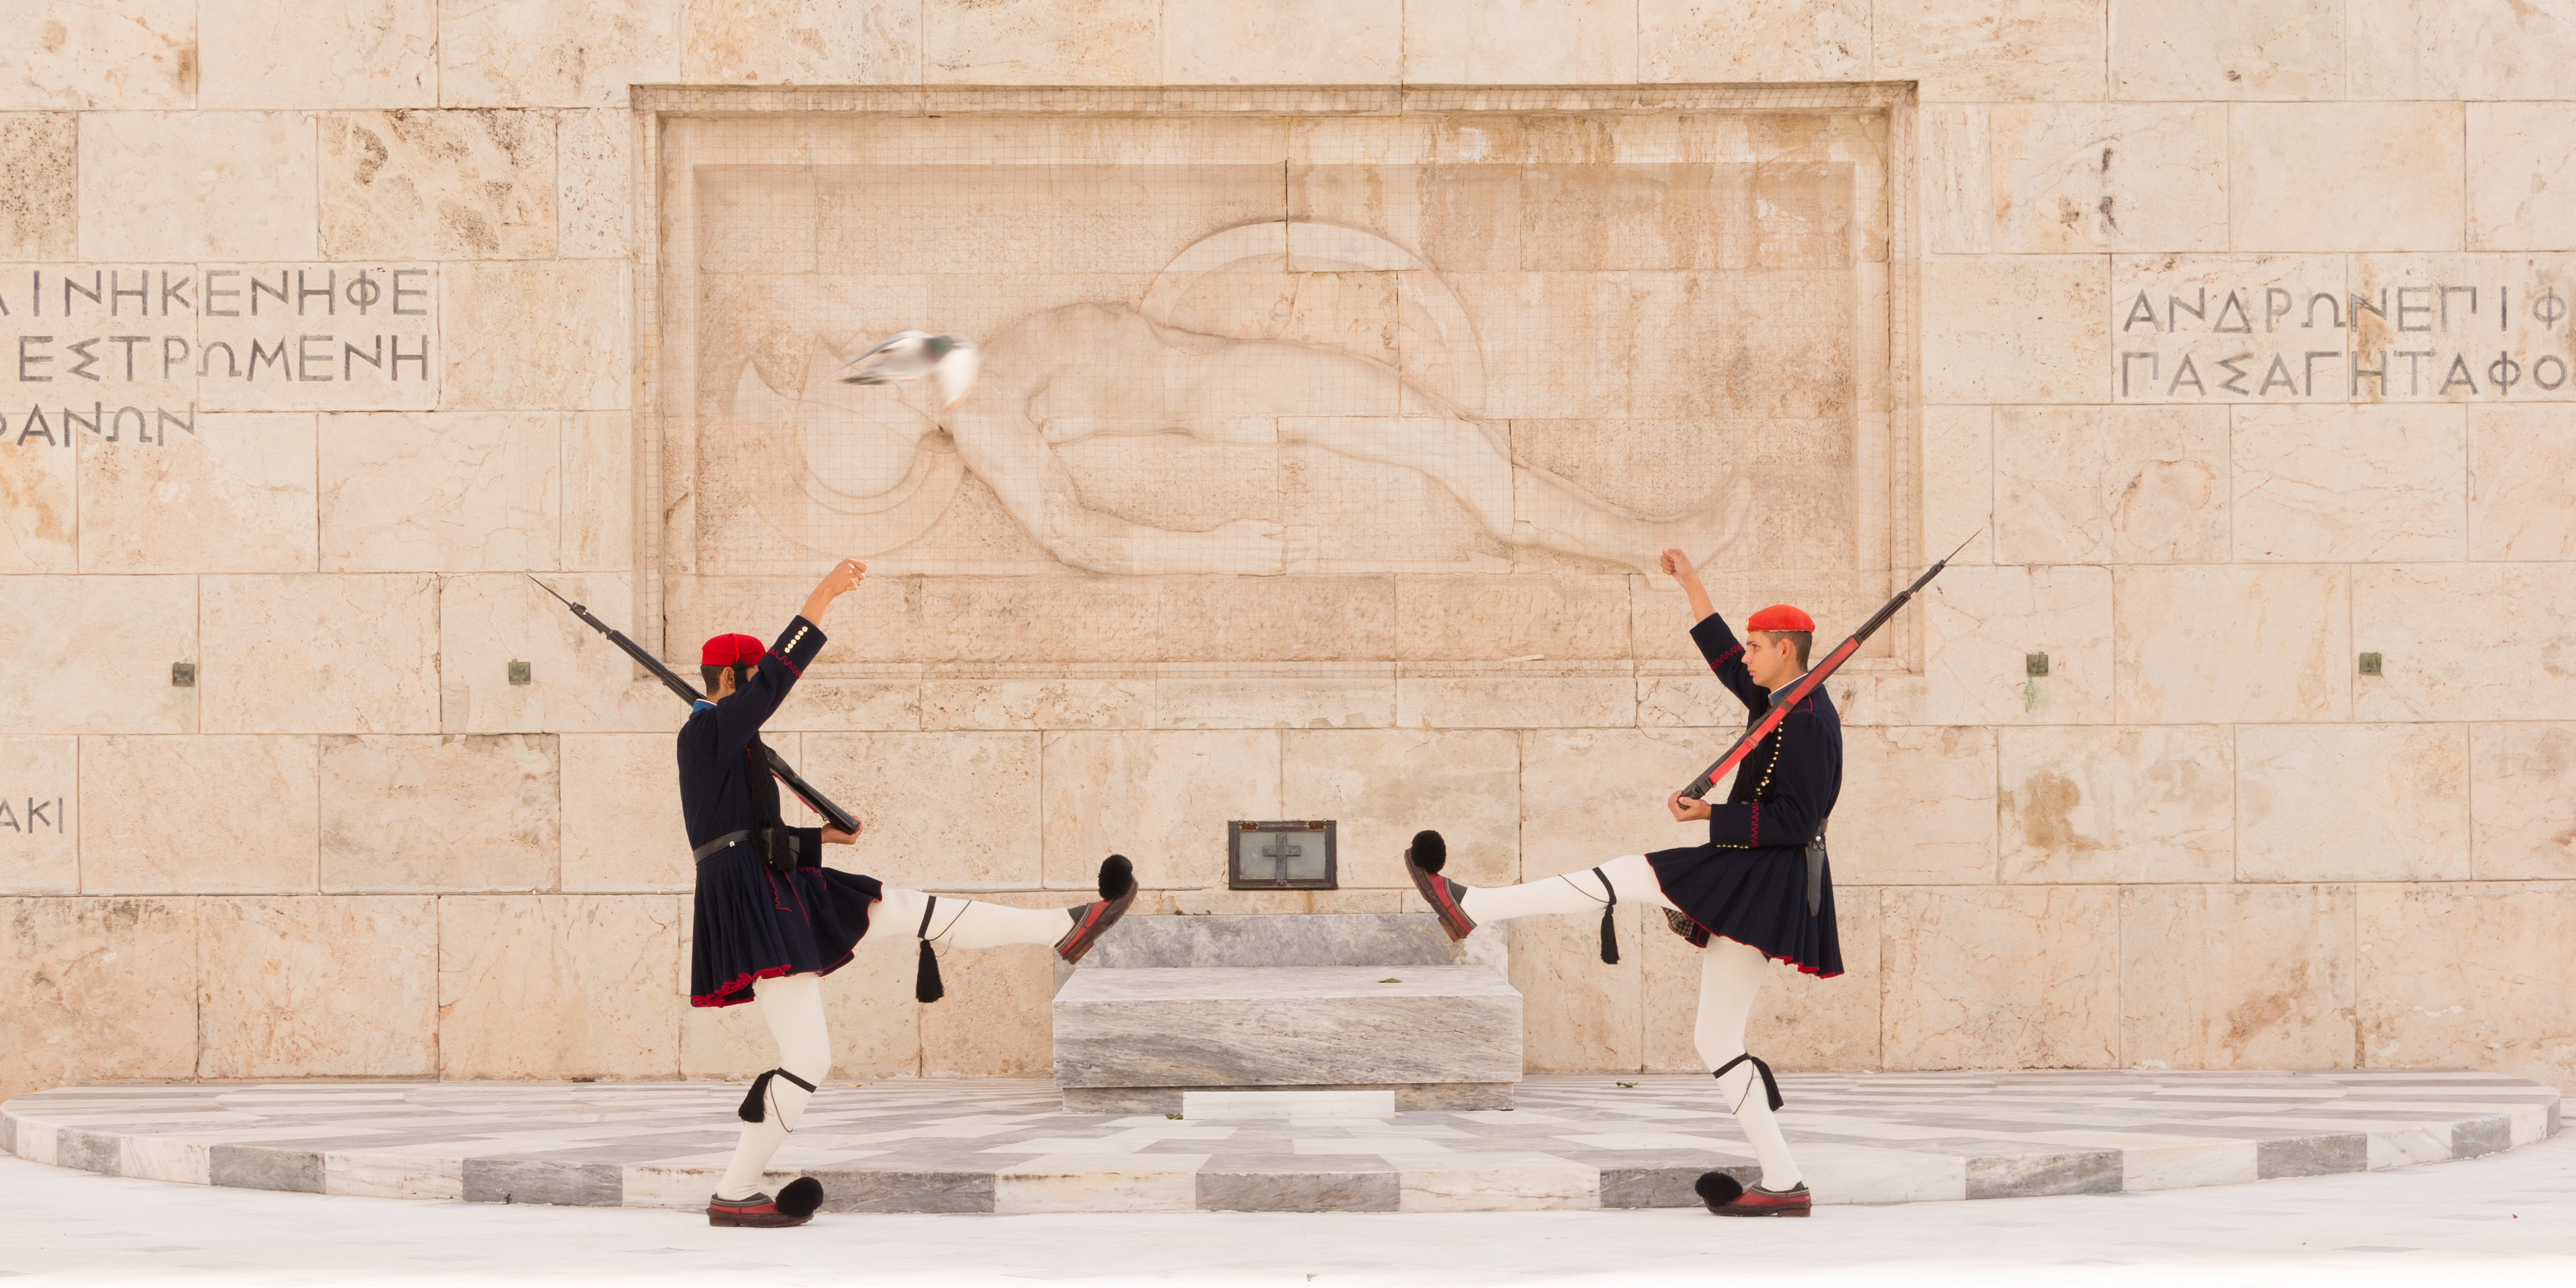 Two Evzones Tomb Unknown Soldier Athens Greece